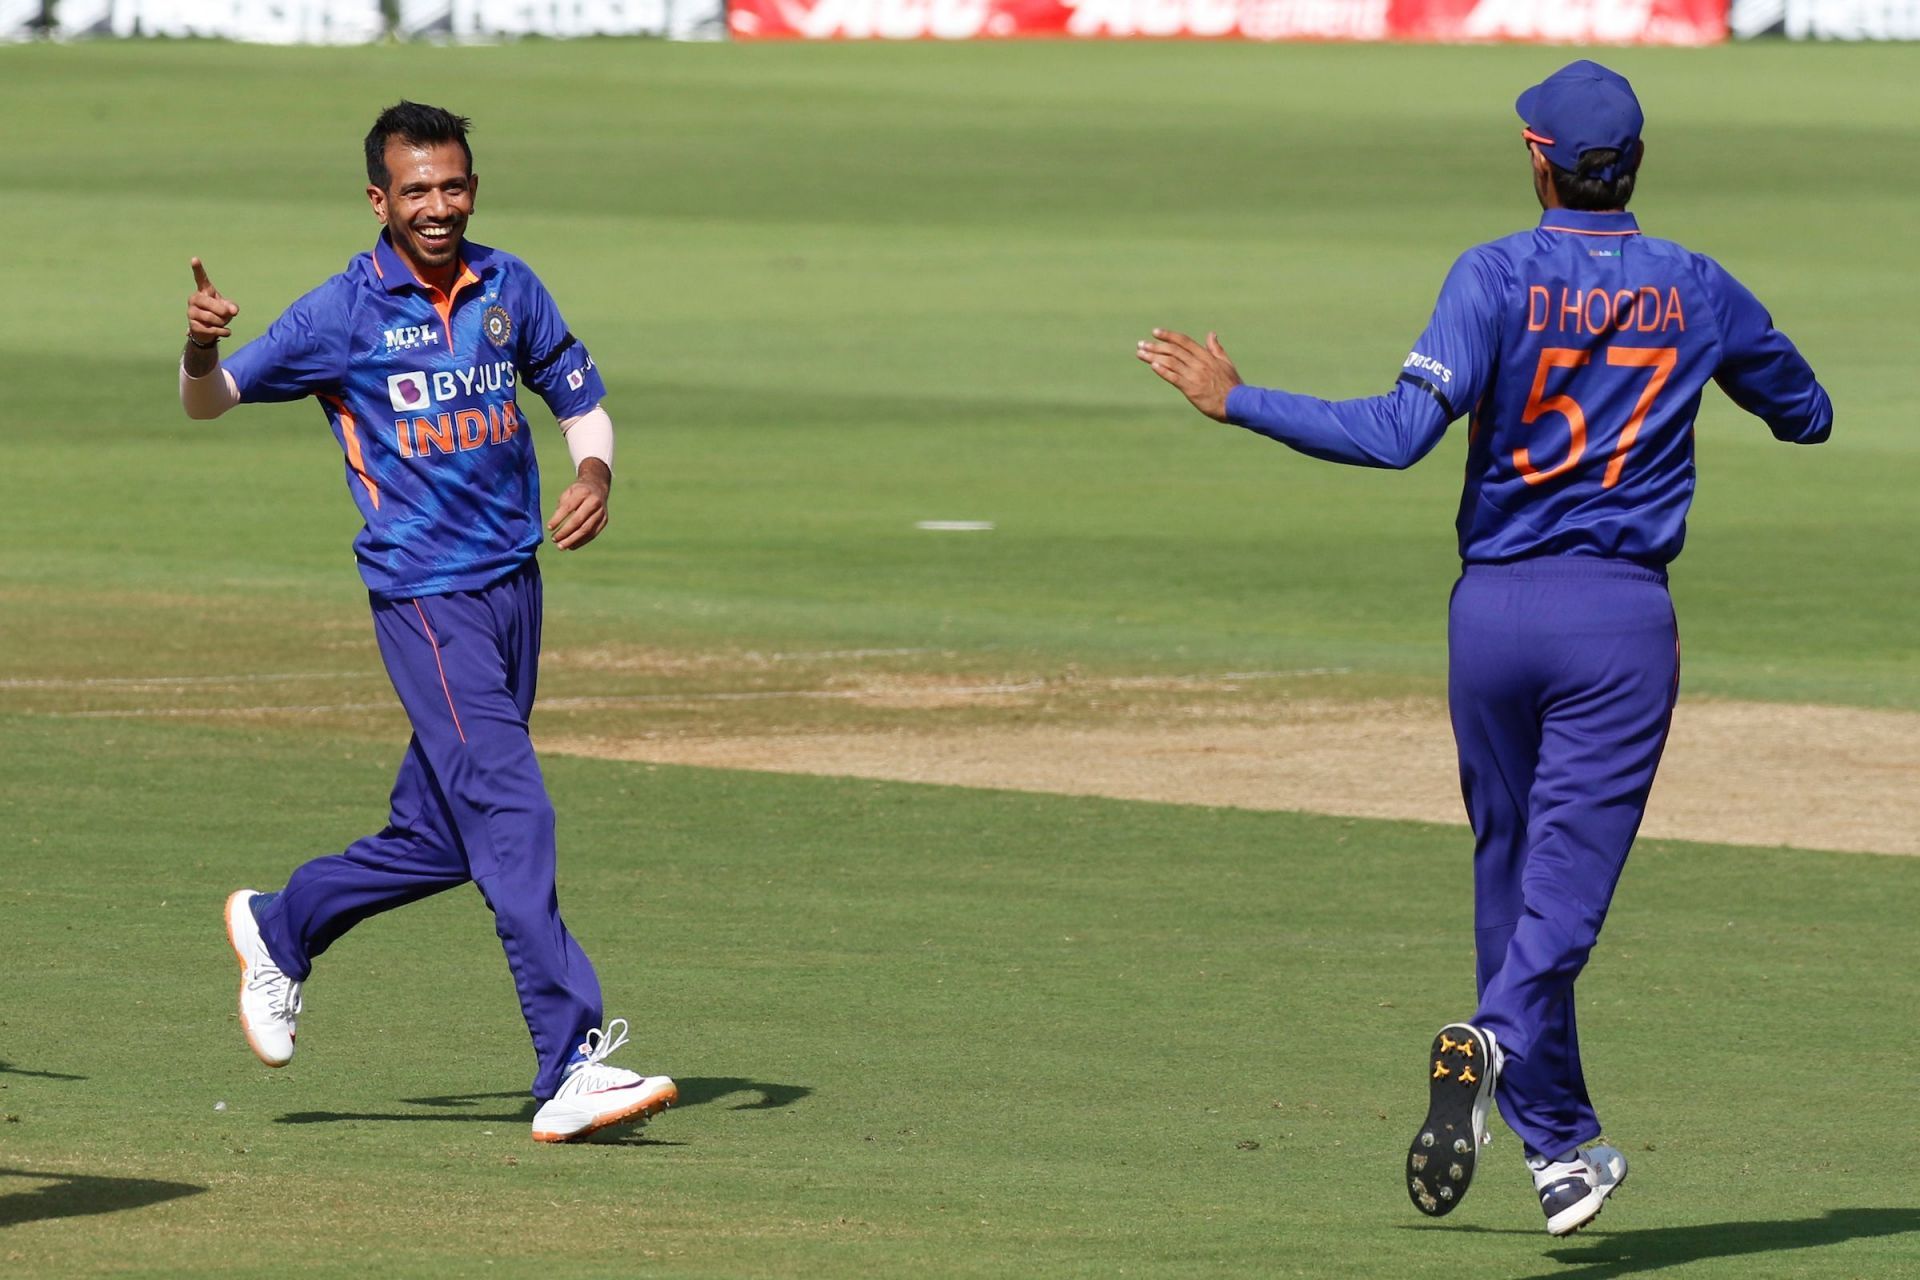 Welcome return to form for Chahal in India colours